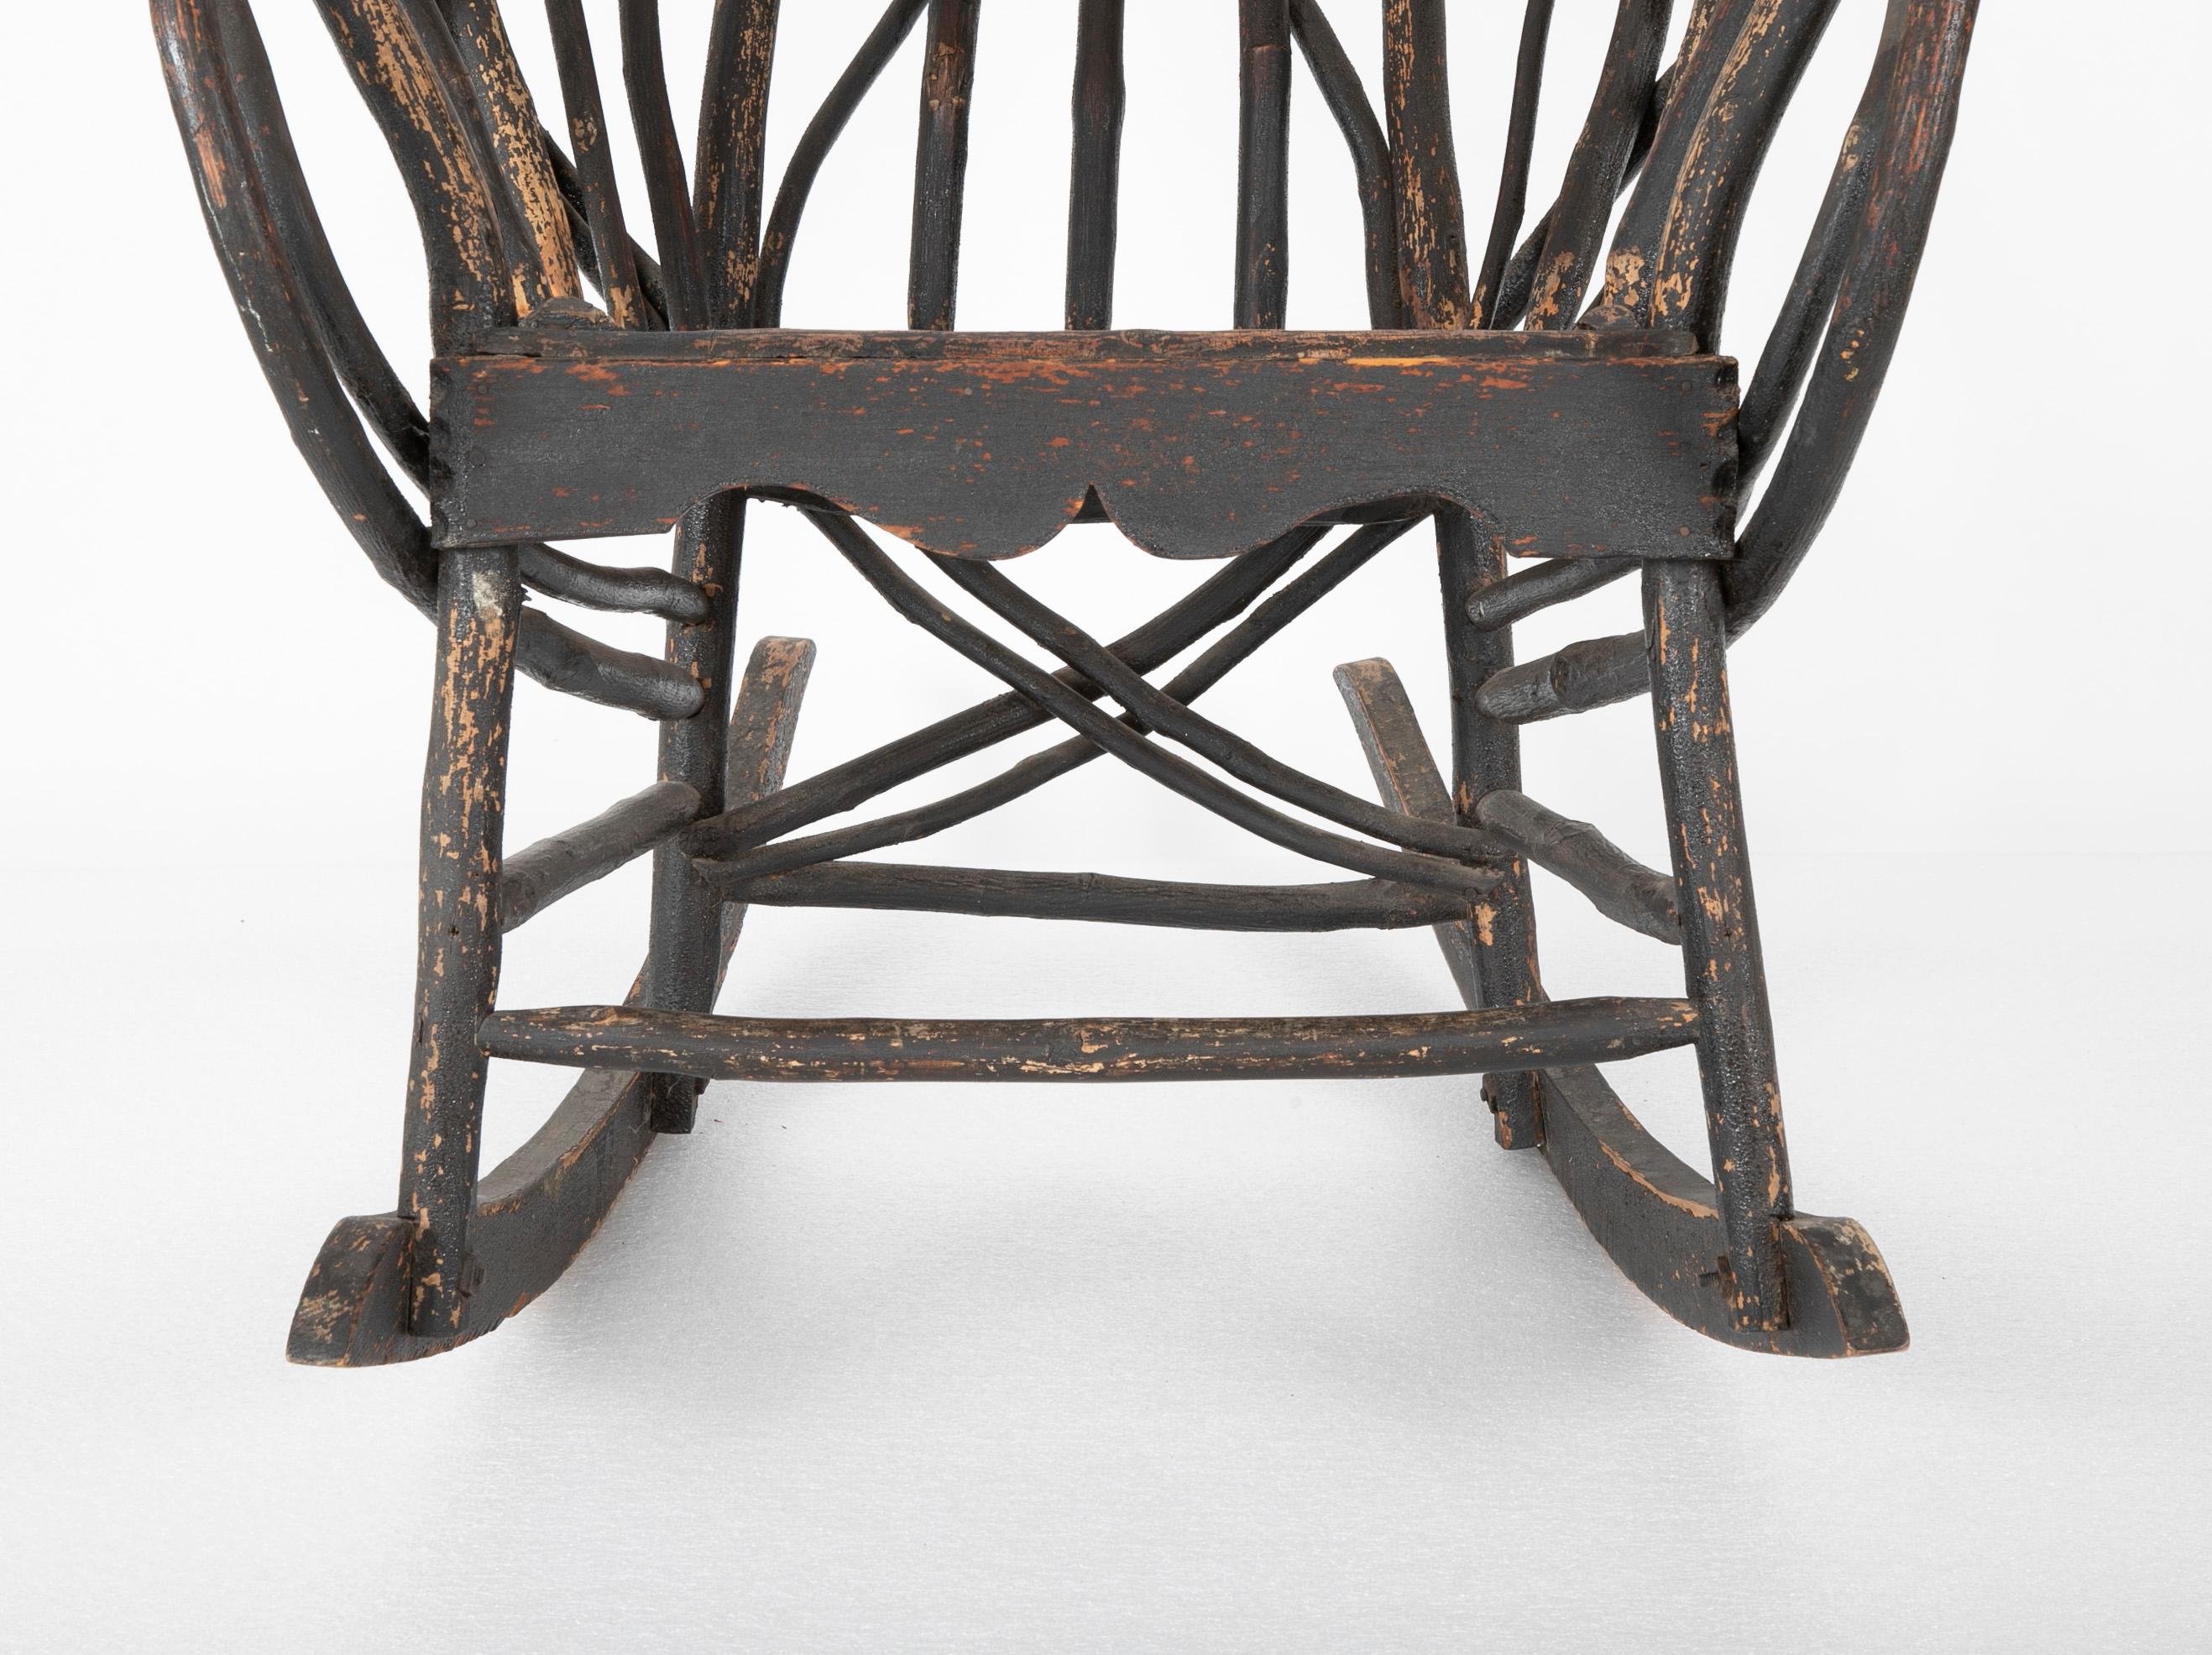 20th Century Bentwood Rustic Armchair-Rocker with Plank Seat & Traces of Early Black Paint